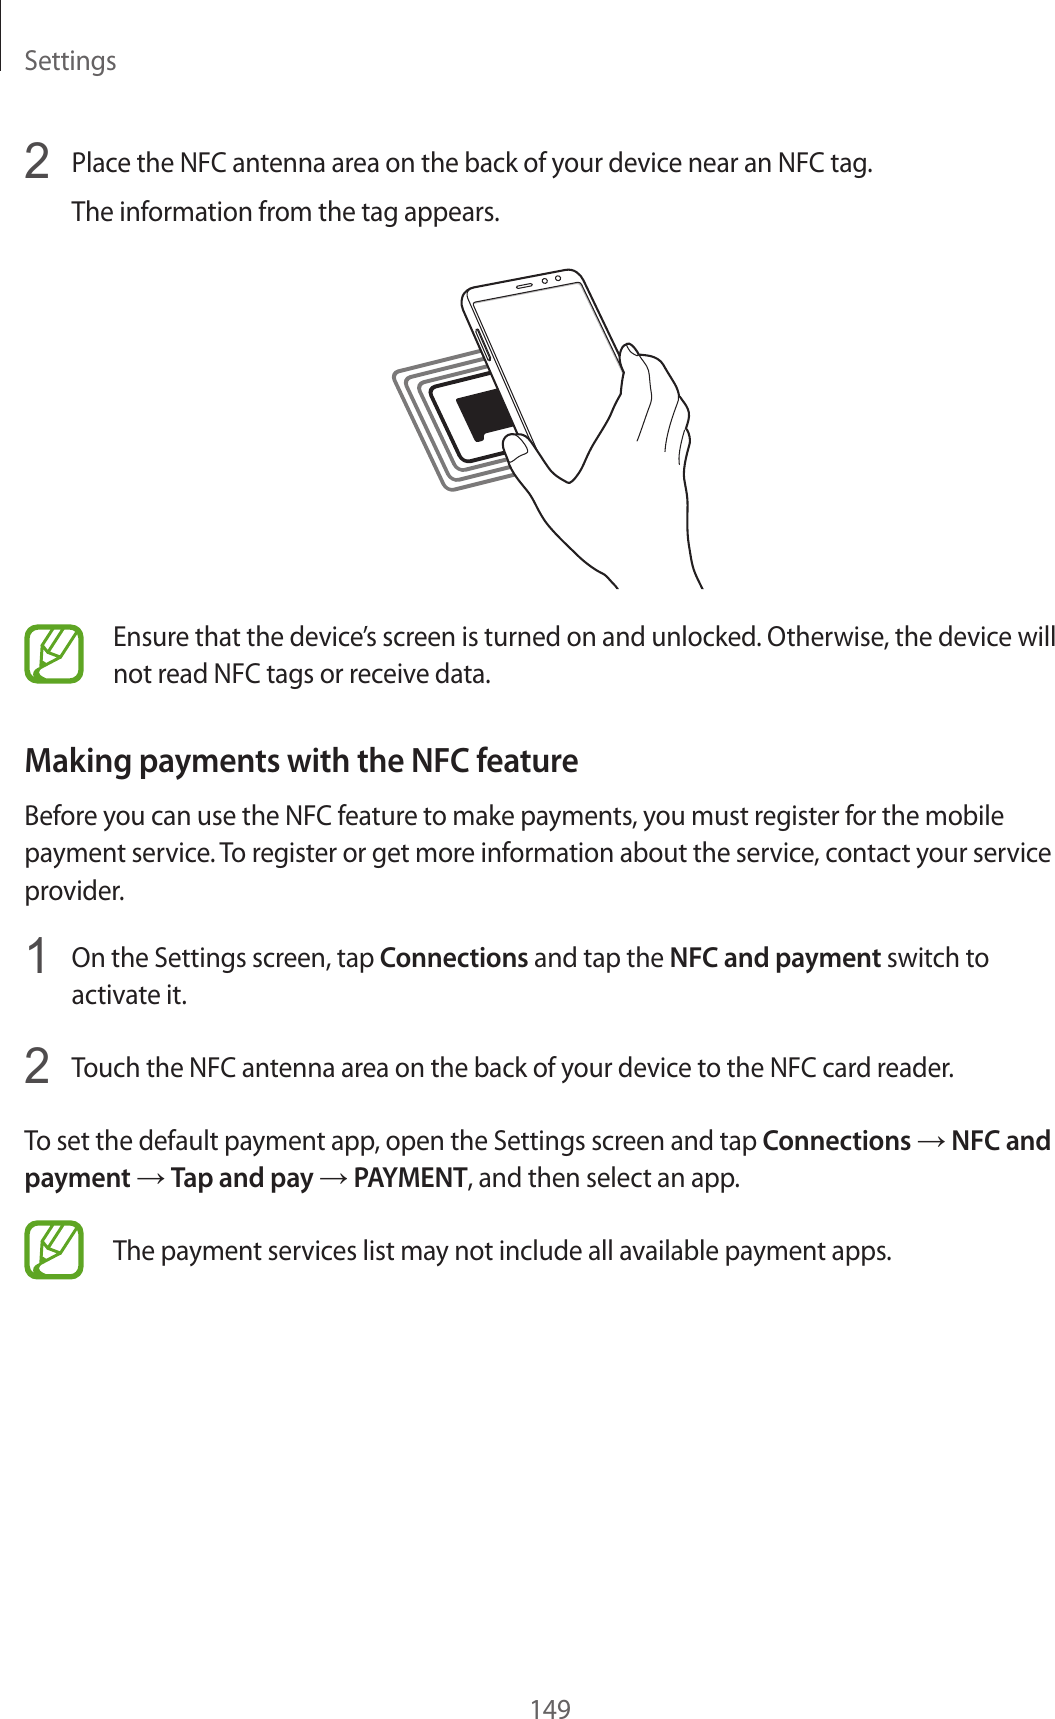 Settings1492  Place the NFC antenna area on the back of your device near an NFC tag.The information from the tag appears.Ensure that the device’s screen is turned on and unlocked. Otherwise, the device will not read NFC tags or receive data.Making payments with the NFC featureBefore you can use the NFC feature to make payments, you must register for the mobile payment service. To register or get more information about the service, contact your service provider.1  On the Settings screen, tap Connections and tap the NFC and payment switch to activate it.2  Touch the NFC antenna area on the back of your device to the NFC card reader.To set the default payment app, open the Settings screen and tap Connections → NFC and payment → Tap and pay → PAYMENT, and then select an app.The payment services list may not include all available payment apps.